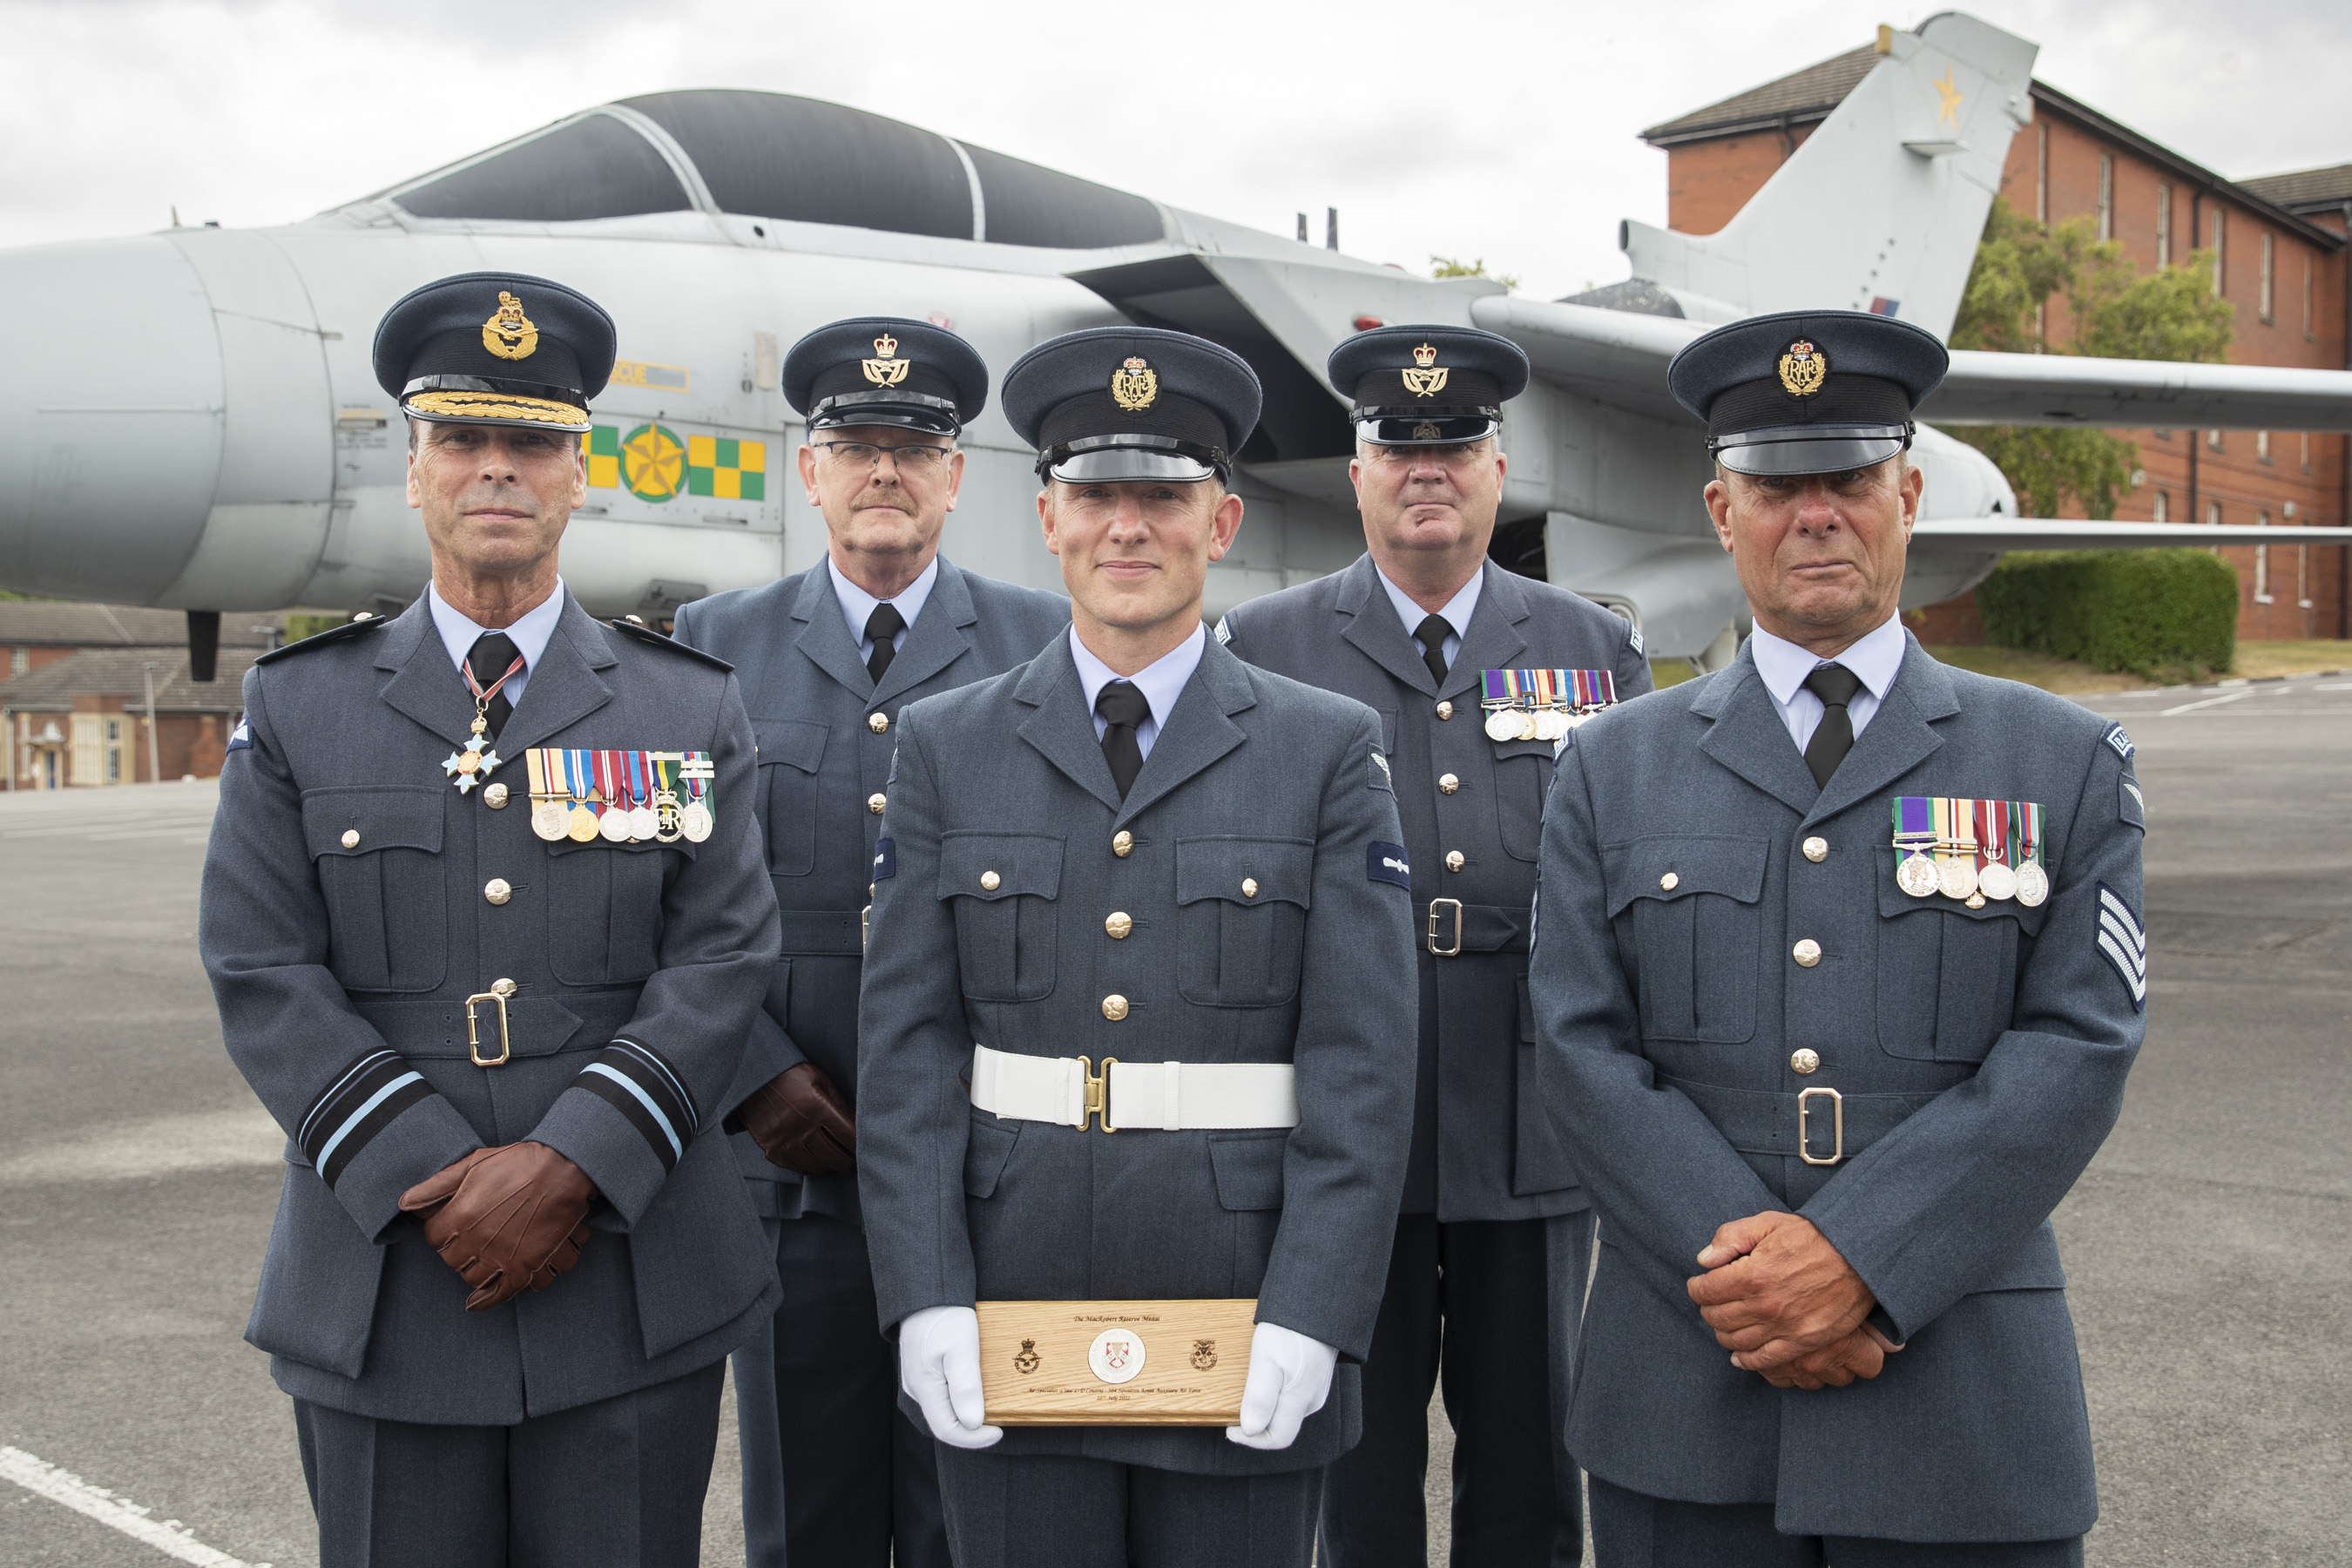 From left to right: Air Vice-Marshal Ranald Munro, Warrant Officer Sweeney Jarvis (504 Sqn Catering Flight), Air Specialist Class 2 David Cousins, Warrant Officer Chris Peacock, Sergeant Nicholas Woolmer (504 Sqn Training Flight)